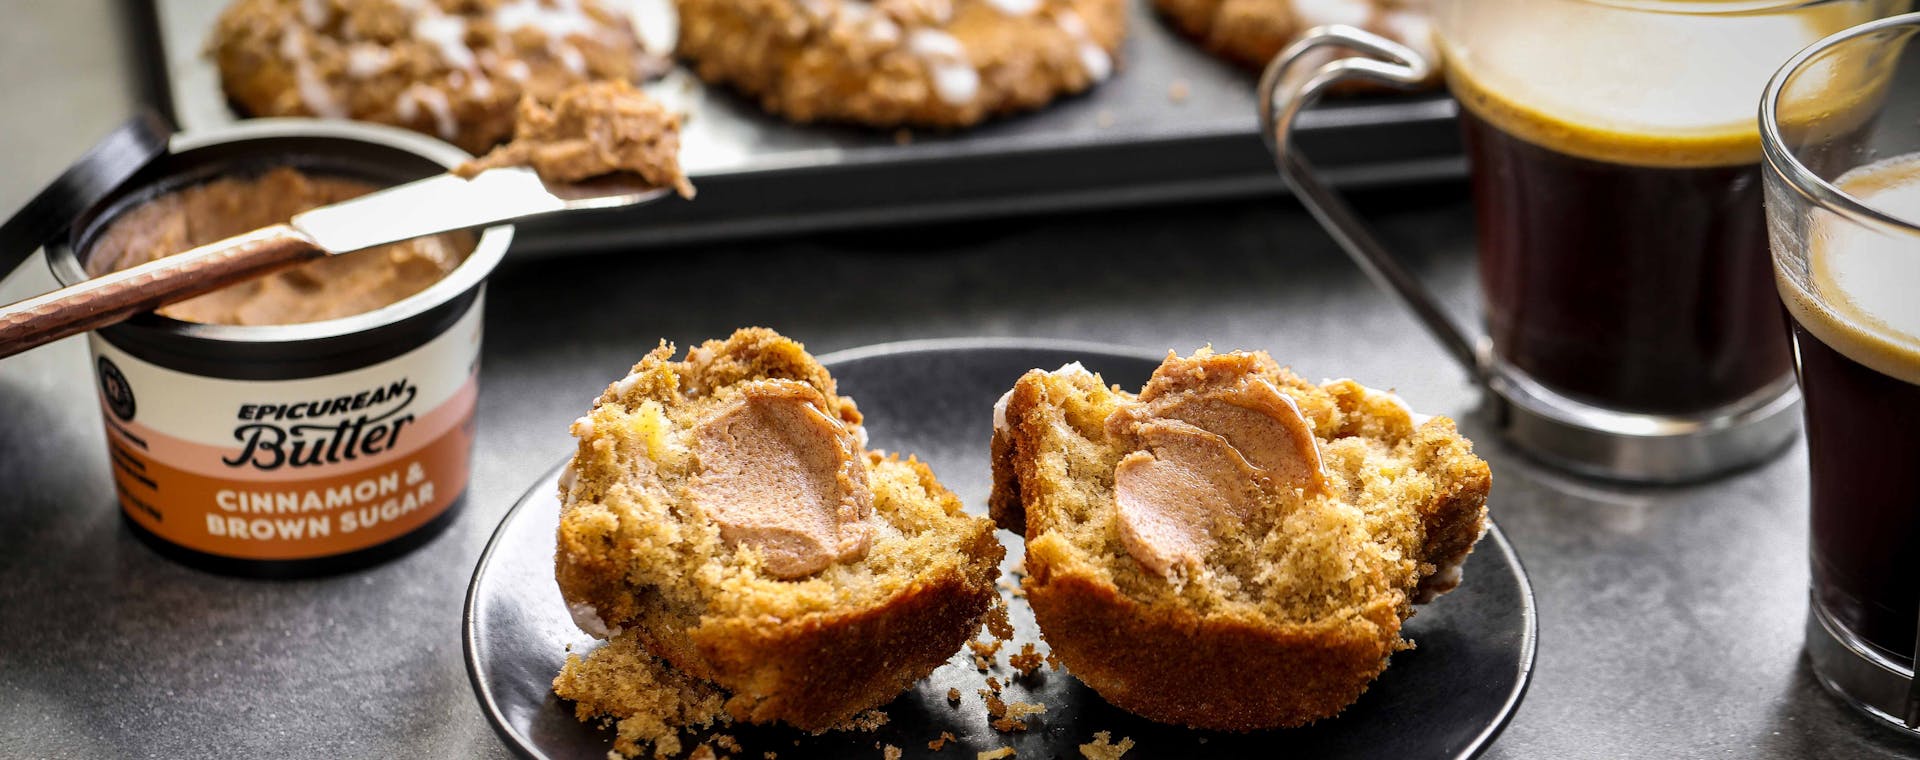 Apple Cinnamon Streusel Muffins made with Epicurean Butter Cinnamon & Brown Sugar Flavored Butter